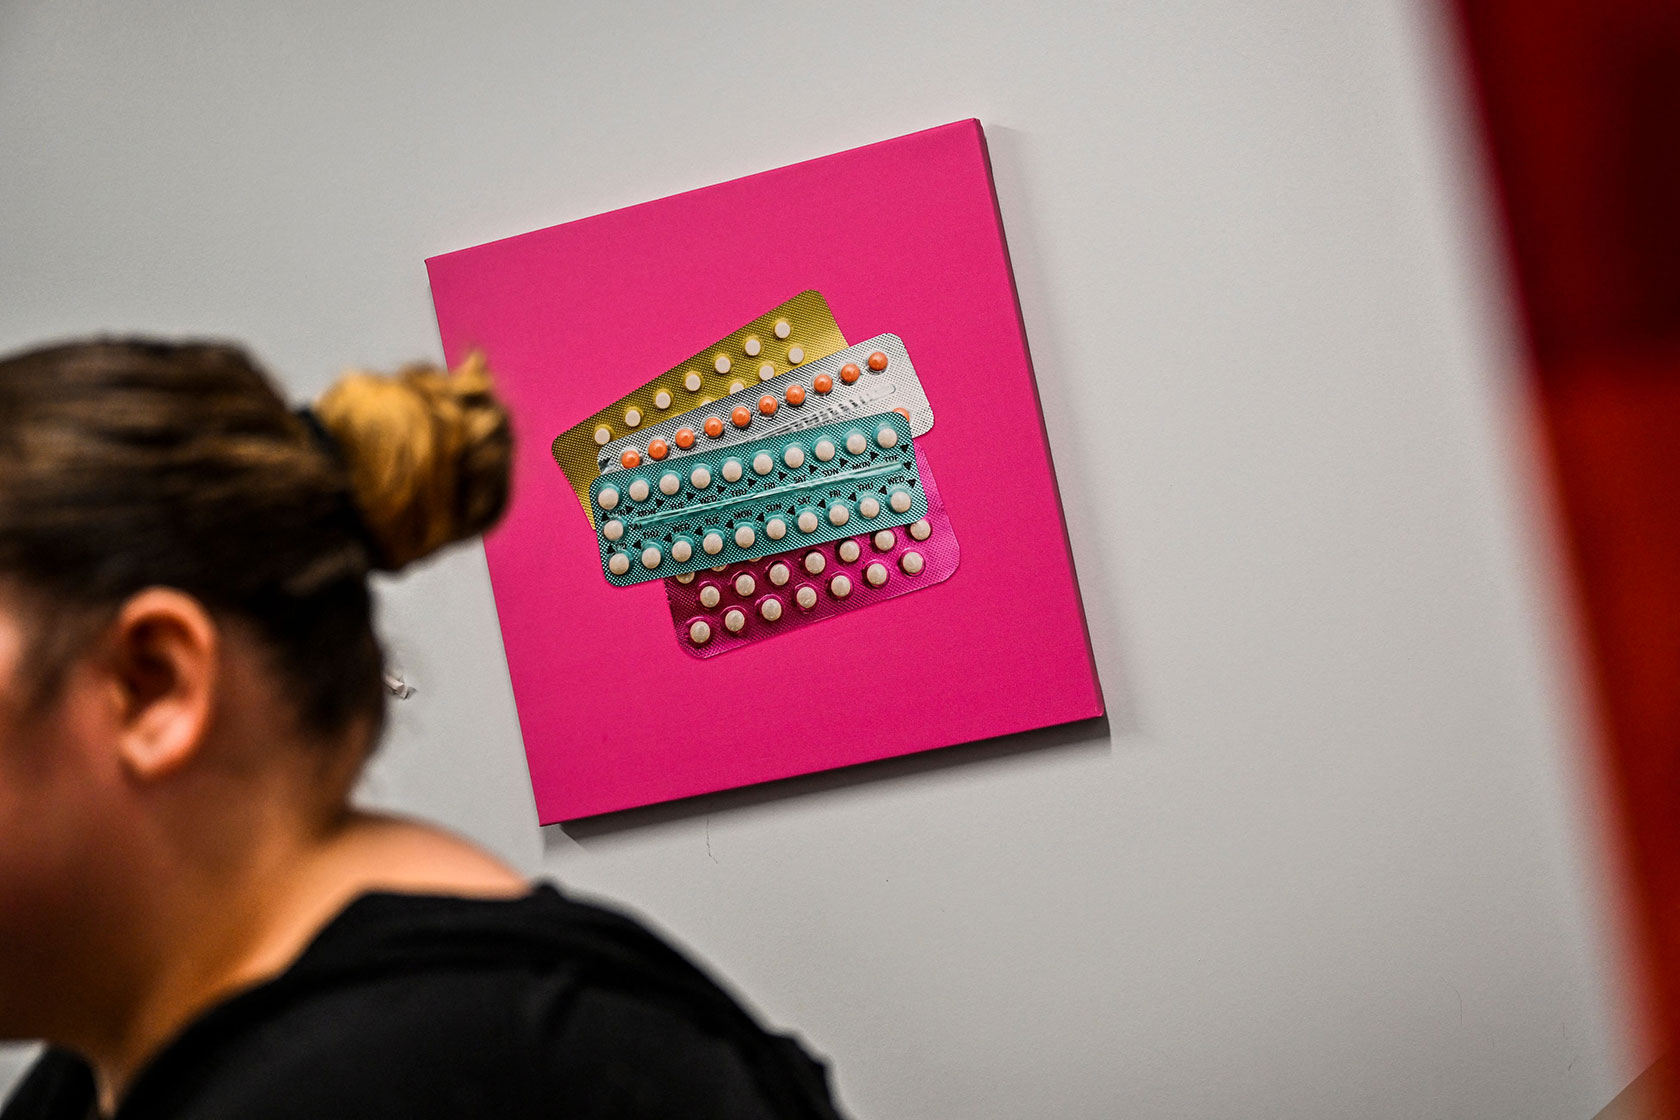 Artwork depicting contraceptive pills is seen behind a woman waiting at a family planning center.